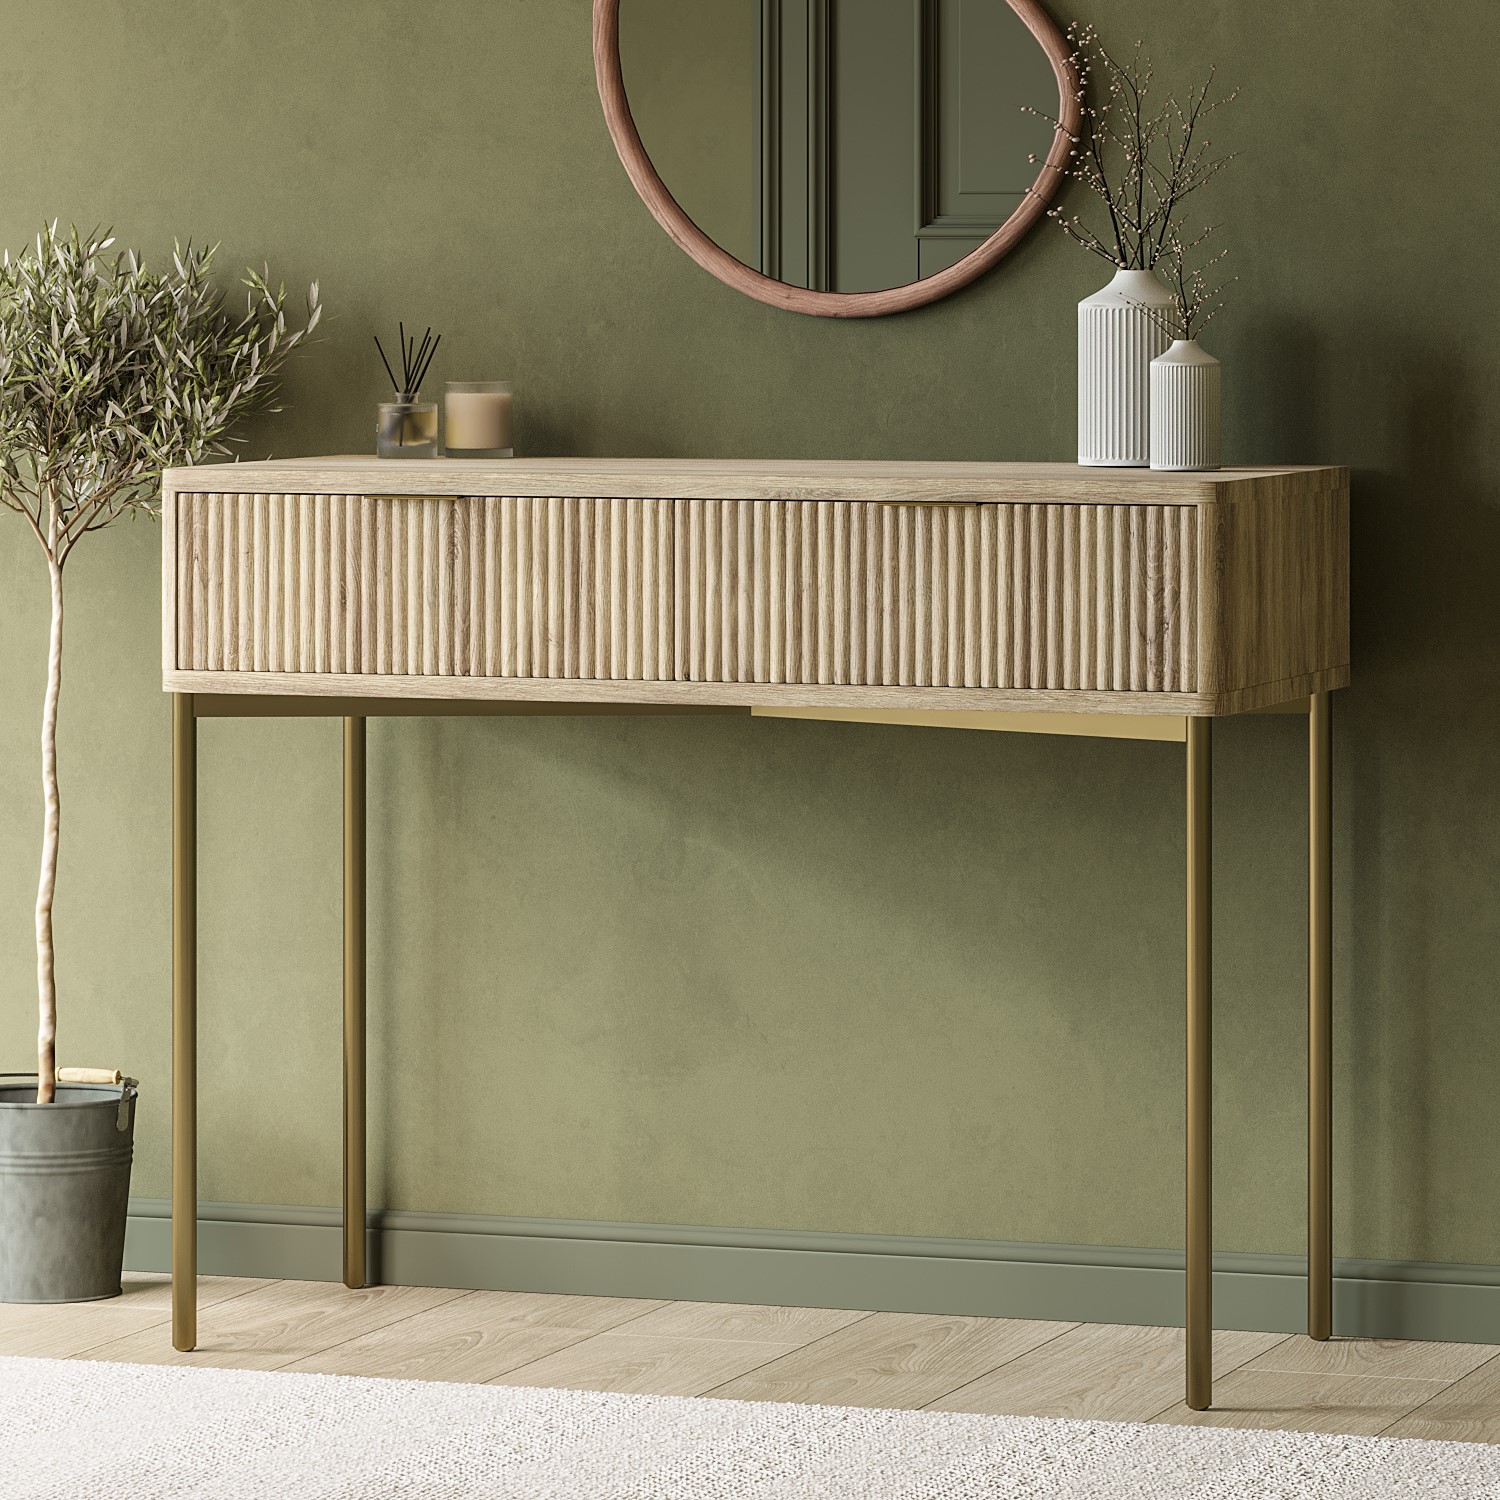 Photo of Oak and gold ribbed dressing table with storage drawers - valencia